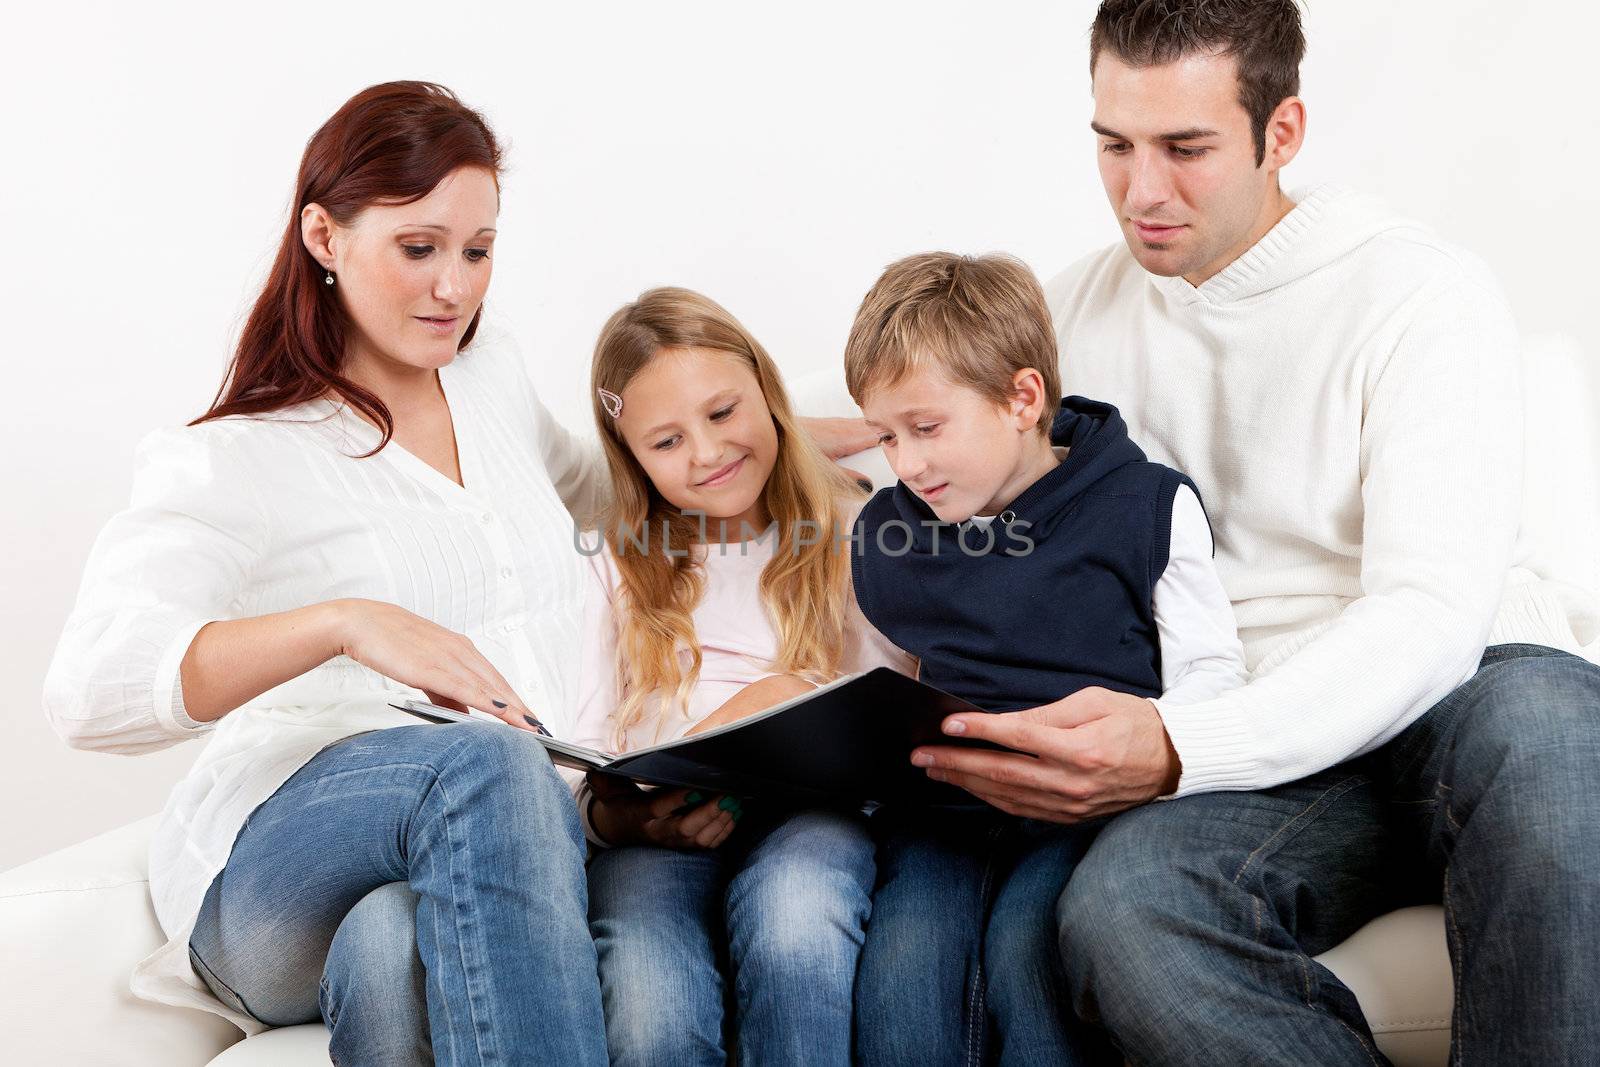 Hapy young family watching photo album at home